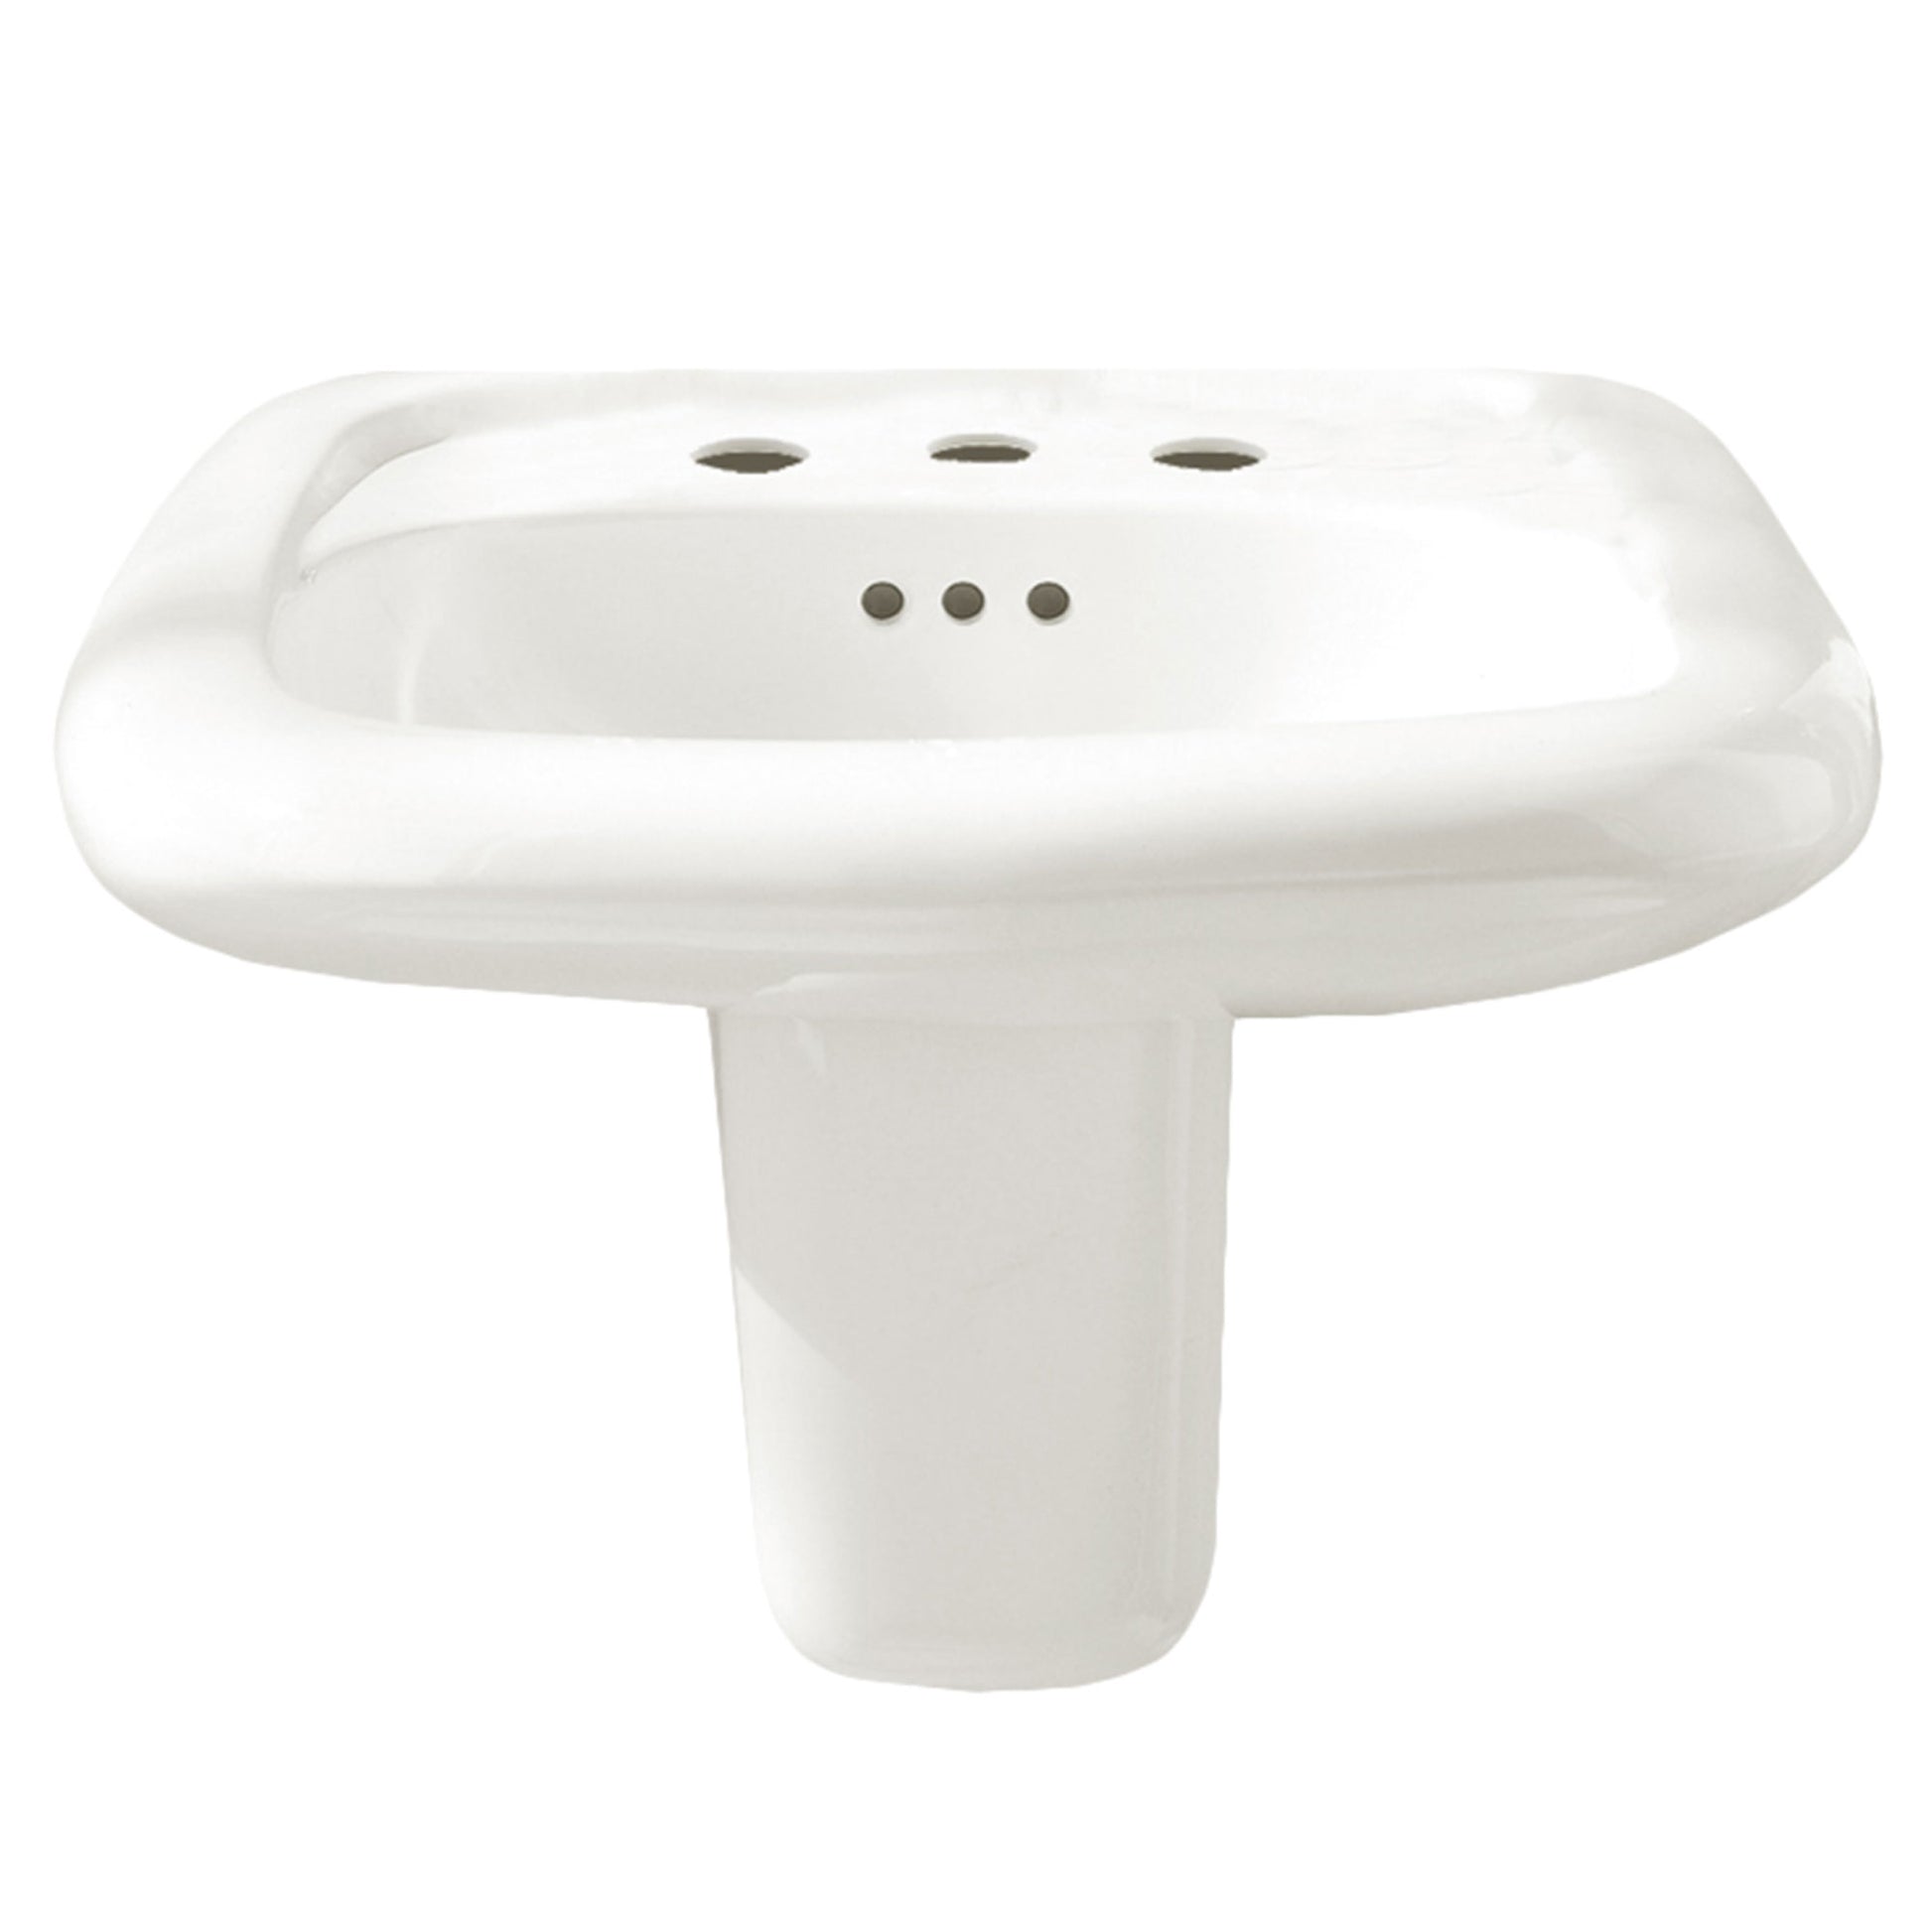 AMERICAN-STANDARD 0958008EC.020, Murro Wall-Hung EverClean Sink With 8-Inch Widespread in White